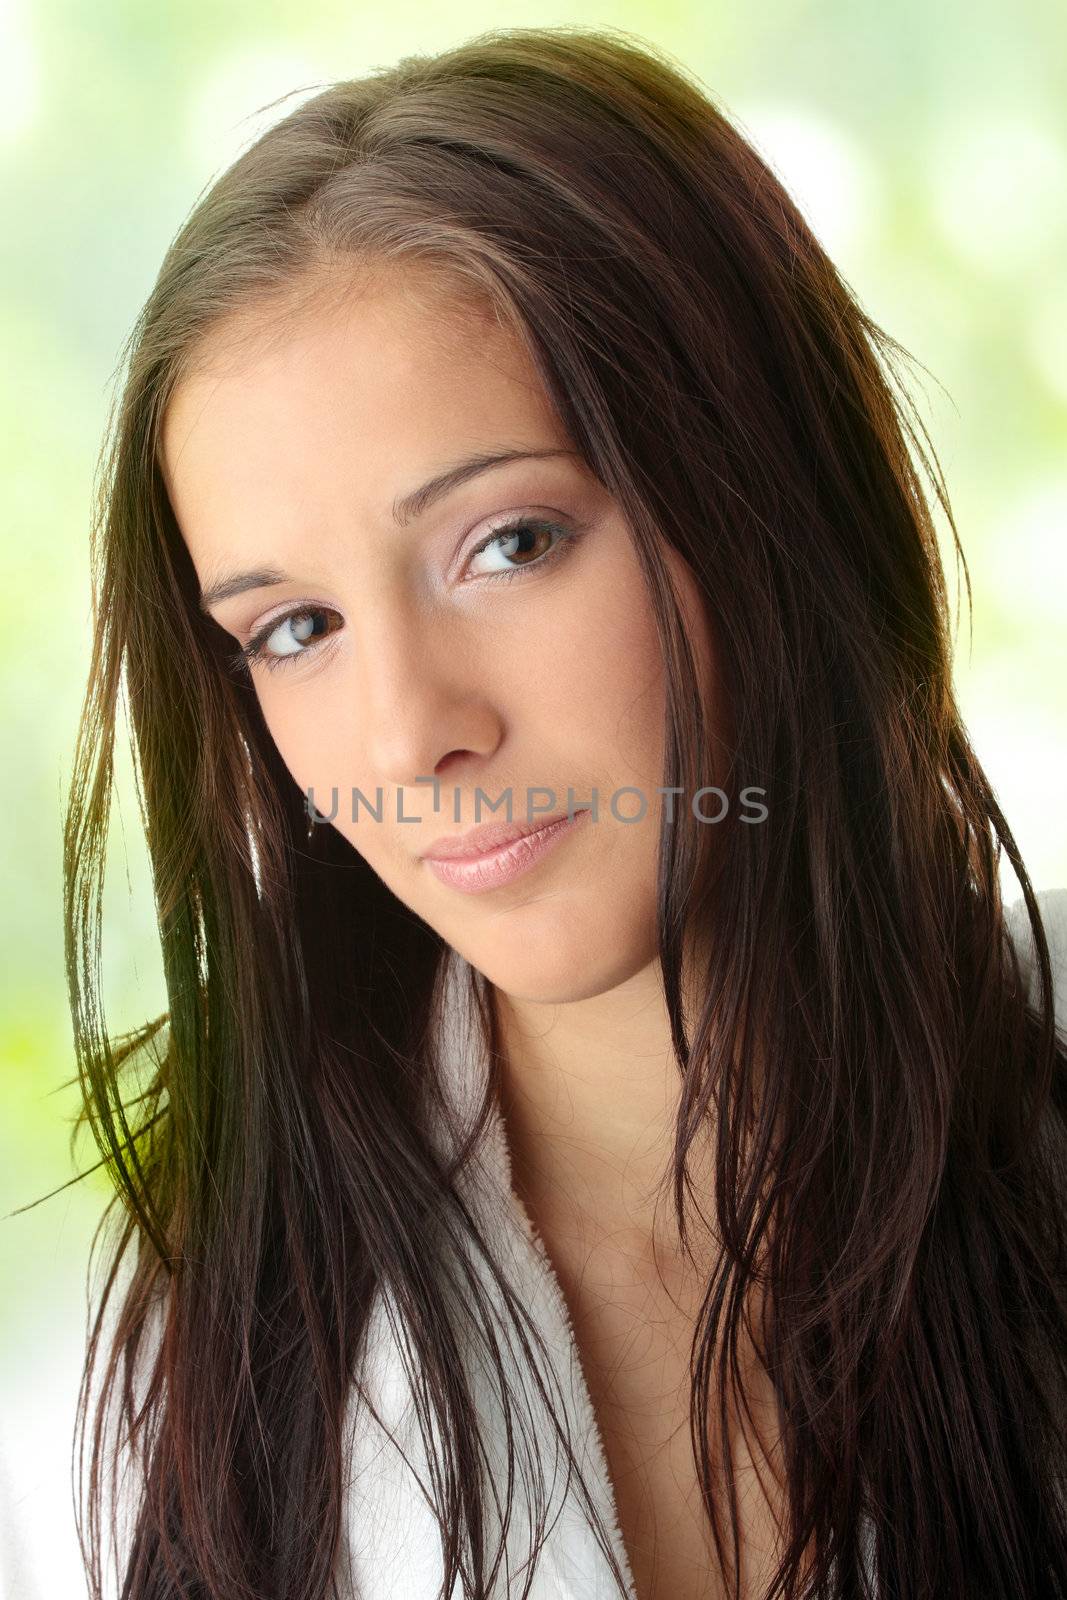 Young woman in white bathtub against abstract green background